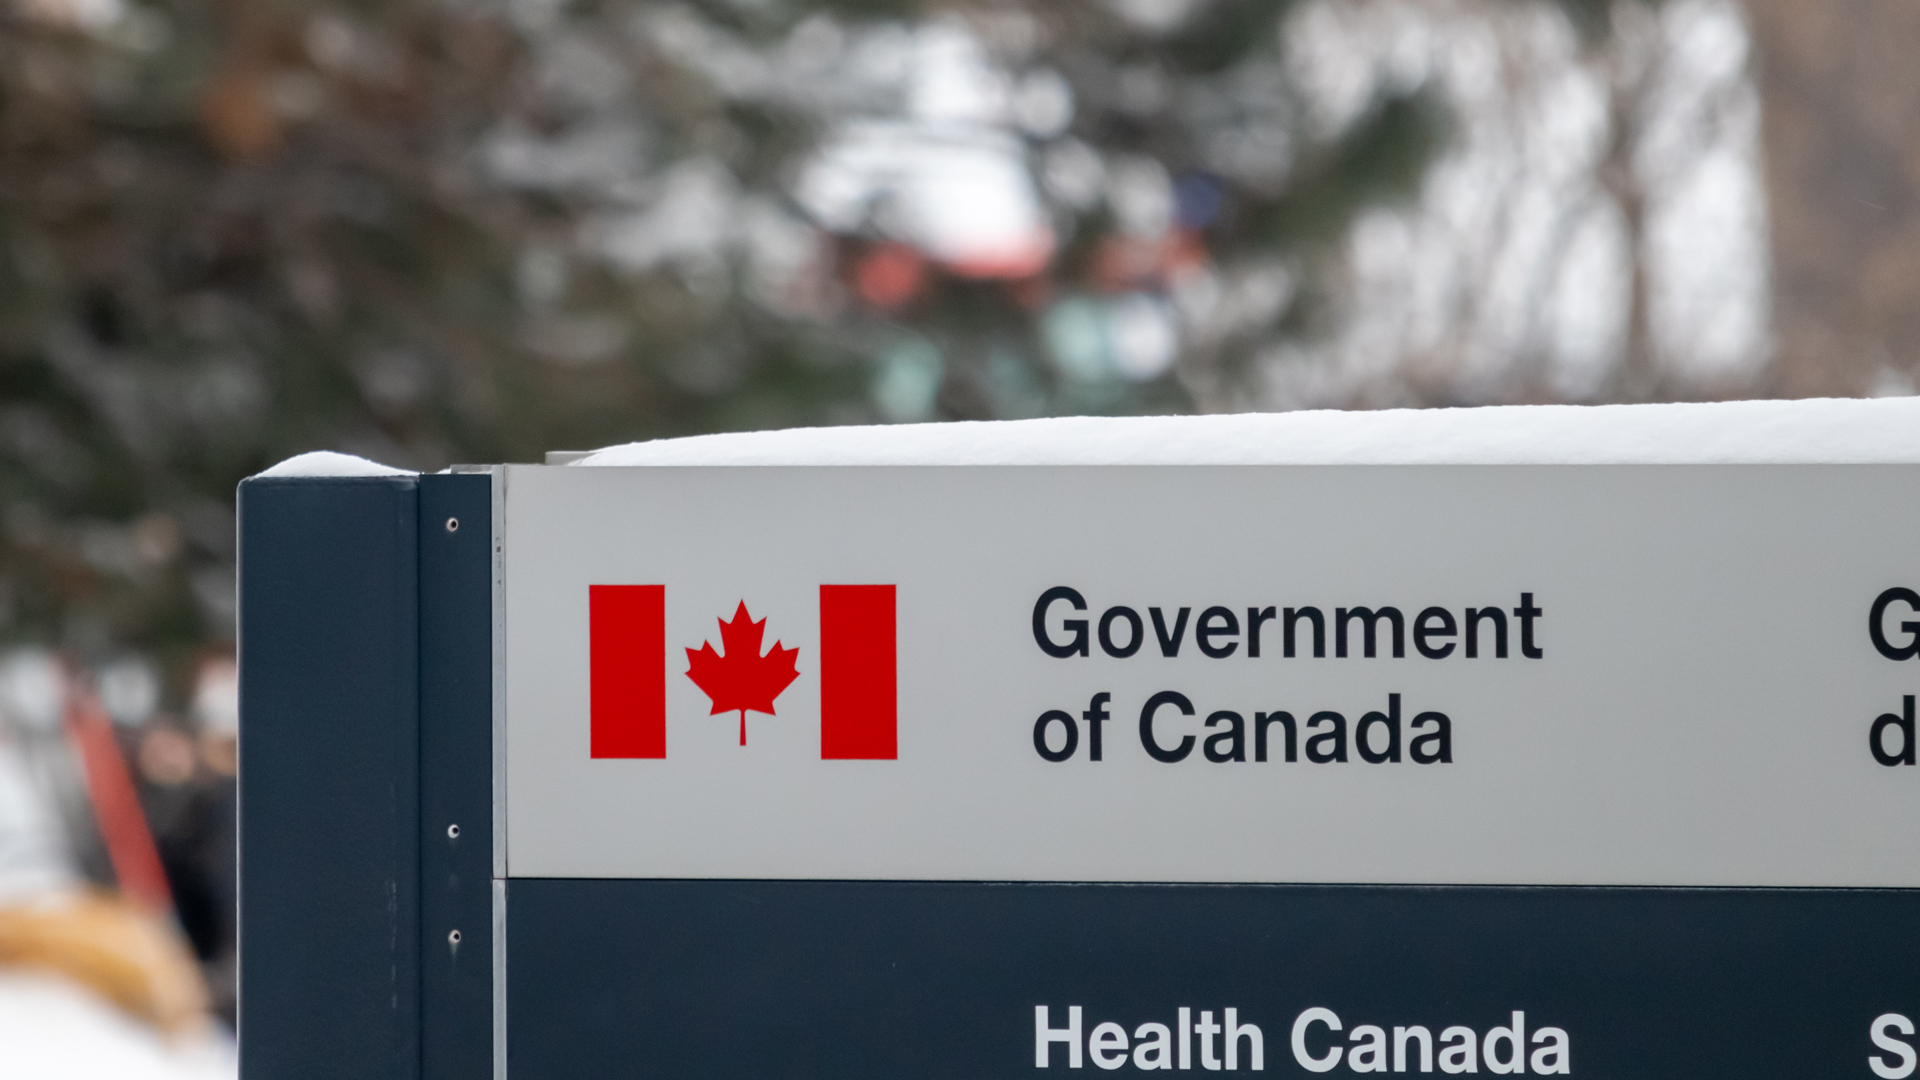 Health Canada announces Extension of Current TMALs and Proposed New Regulations